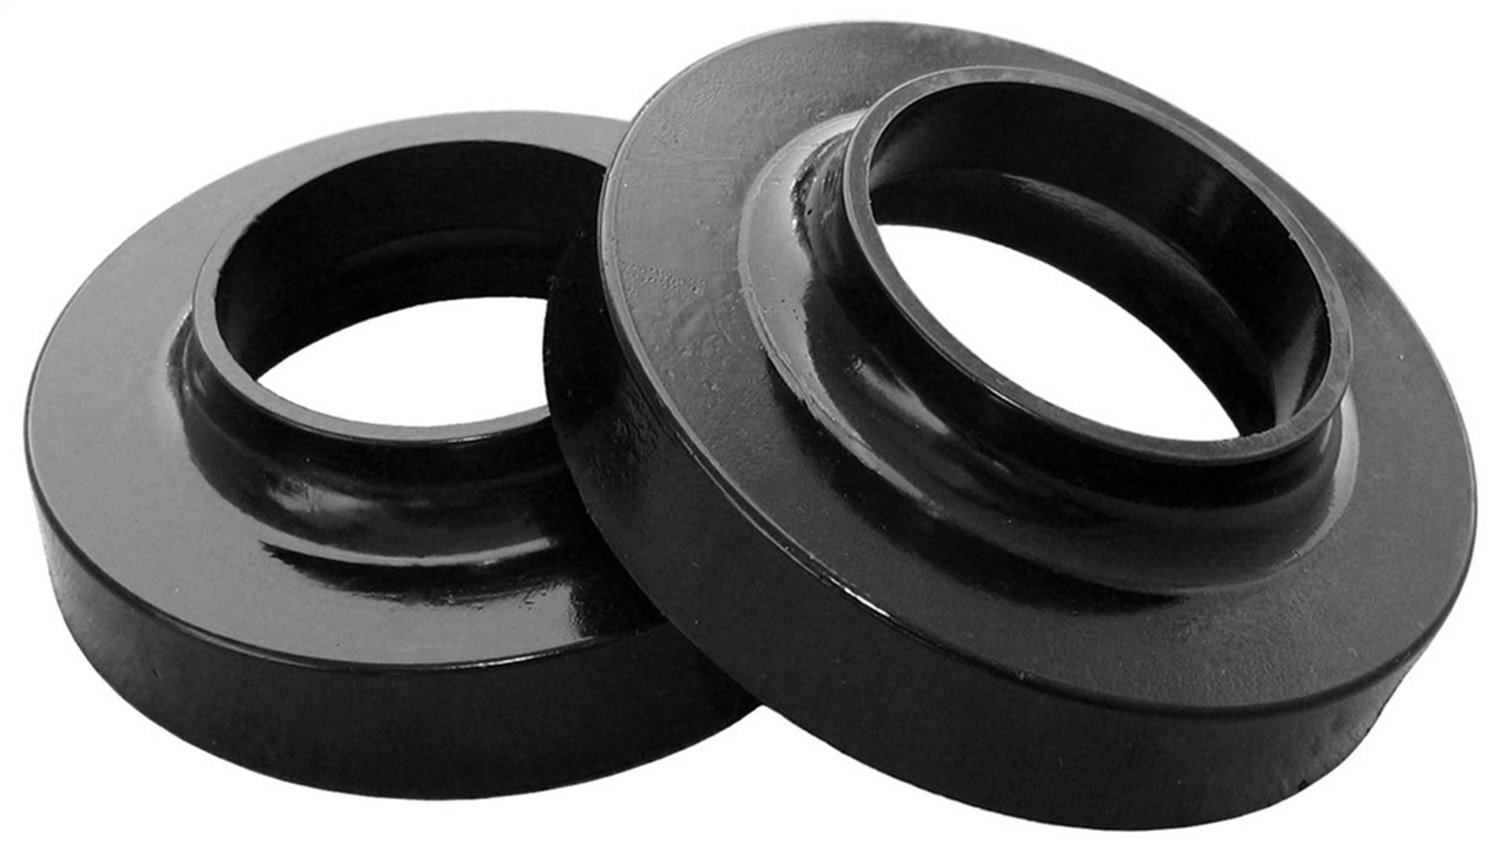 QuickLift Coil Spring Spacers Fits Chevy Avalanche, Suburban, Tahoe, GMC Yukon and Yukon XL